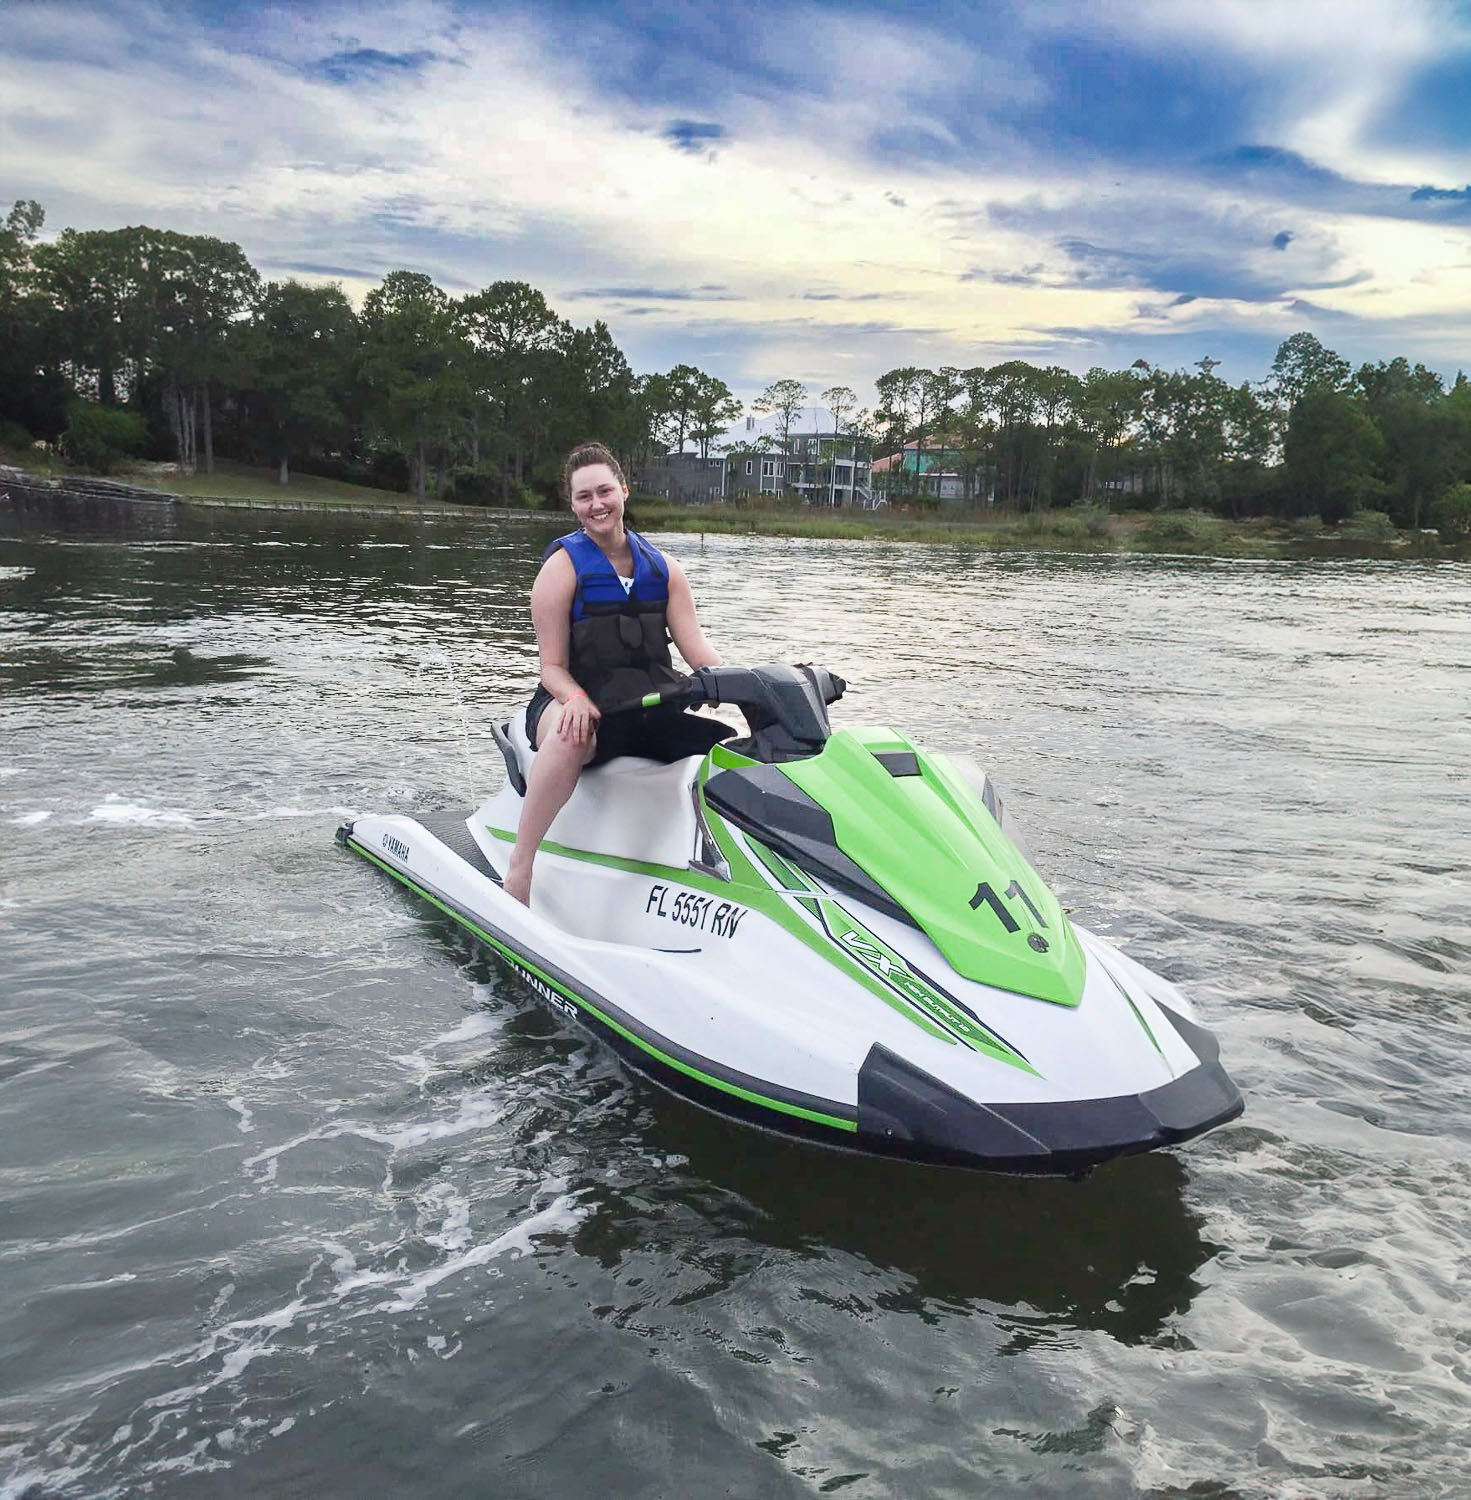 A woman sitting in a jet ski on the water